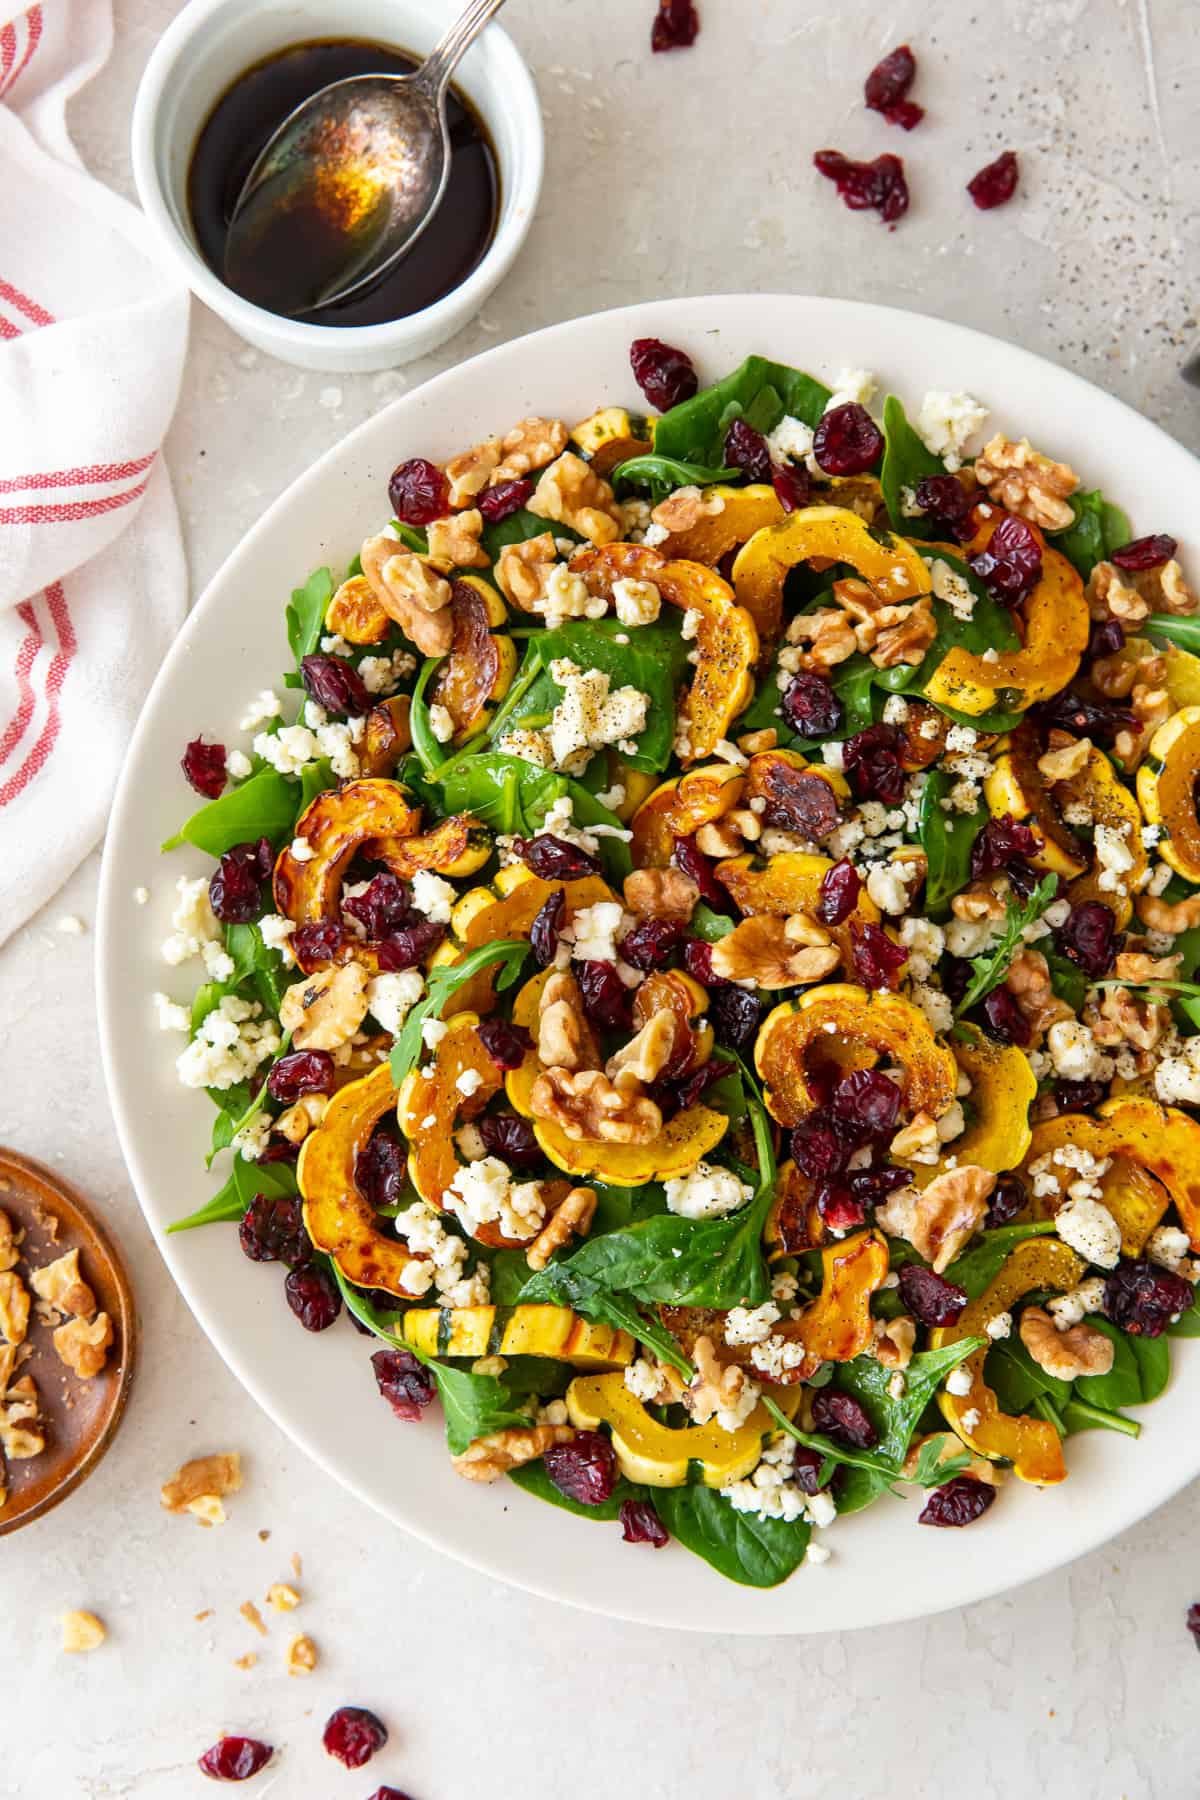 Roasted delicata squash in a white bowl with greens, cranberries and feta.